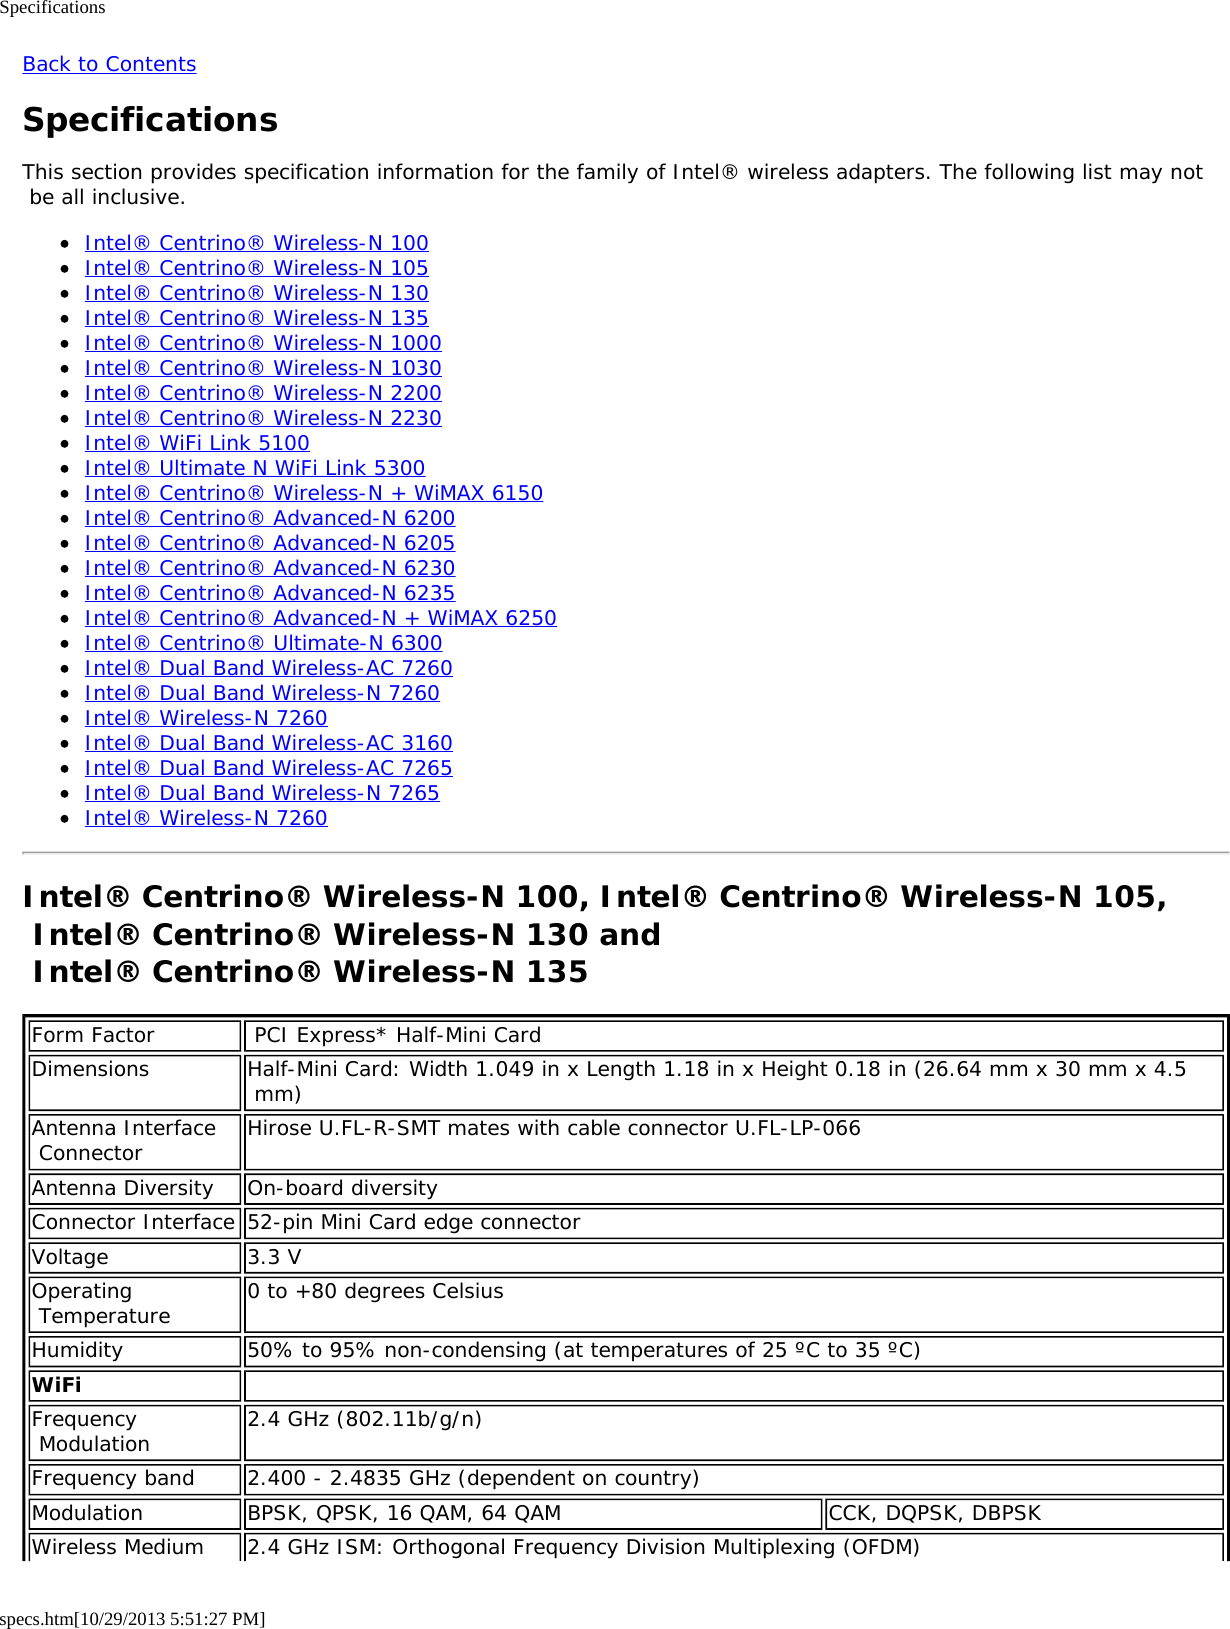 Specificationsspecs.htm[10/29/2013 5:51:27 PM]Back to ContentsSpecificationsThis section provides specification information for the family of Intel® wireless adapters. The following list may not be all inclusive.Intel® Centrino® Wireless-N 100Intel® Centrino® Wireless-N 105Intel® Centrino® Wireless-N 130Intel® Centrino® Wireless-N 135Intel® Centrino® Wireless-N 1000Intel® Centrino® Wireless-N 1030Intel® Centrino® Wireless-N 2200Intel® Centrino® Wireless-N 2230Intel® WiFi Link 5100Intel® Ultimate N WiFi Link 5300Intel® Centrino® Wireless-N + WiMAX 6150Intel® Centrino® Advanced-N 6200Intel® Centrino® Advanced-N 6205Intel® Centrino® Advanced-N 6230Intel® Centrino® Advanced-N 6235Intel® Centrino® Advanced-N + WiMAX 6250Intel® Centrino® Ultimate-N 6300Intel® Dual Band Wireless-AC 7260Intel® Dual Band Wireless-N 7260Intel® Wireless-N 7260Intel® Dual Band Wireless-AC 3160Intel® Dual Band Wireless-AC 7265Intel® Dual Band Wireless-N 7265Intel® Wireless-N 7260Intel® Centrino® Wireless-N 100, Intel® Centrino® Wireless-N 105, Intel® Centrino® Wireless-N 130 and  Intel® Centrino® Wireless-N 135Form Factor  PCI Express* Half-Mini CardDimensions Half-Mini Card: Width 1.049 in x Length 1.18 in x Height 0.18 in (26.64 mm x 30 mm x 4.5 mm)Antenna Interface Connector Hirose U.FL-R-SMT mates with cable connector U.FL-LP-066Antenna Diversity On-board diversityConnector Interface 52-pin Mini Card edge connectorVoltage 3.3 VOperating Temperature 0 to +80 degrees CelsiusHumidity 50% to 95% non-condensing (at temperatures of 25 ºC to 35 ºC)WiFi  Frequency Modulation 2.4 GHz (802.11b/g/n)Frequency band 2.400 - 2.4835 GHz (dependent on country)Modulation BPSK, QPSK, 16 QAM, 64 QAM CCK, DQPSK, DBPSKWireless Medium 2.4 GHz ISM: Orthogonal Frequency Division Multiplexing (OFDM)